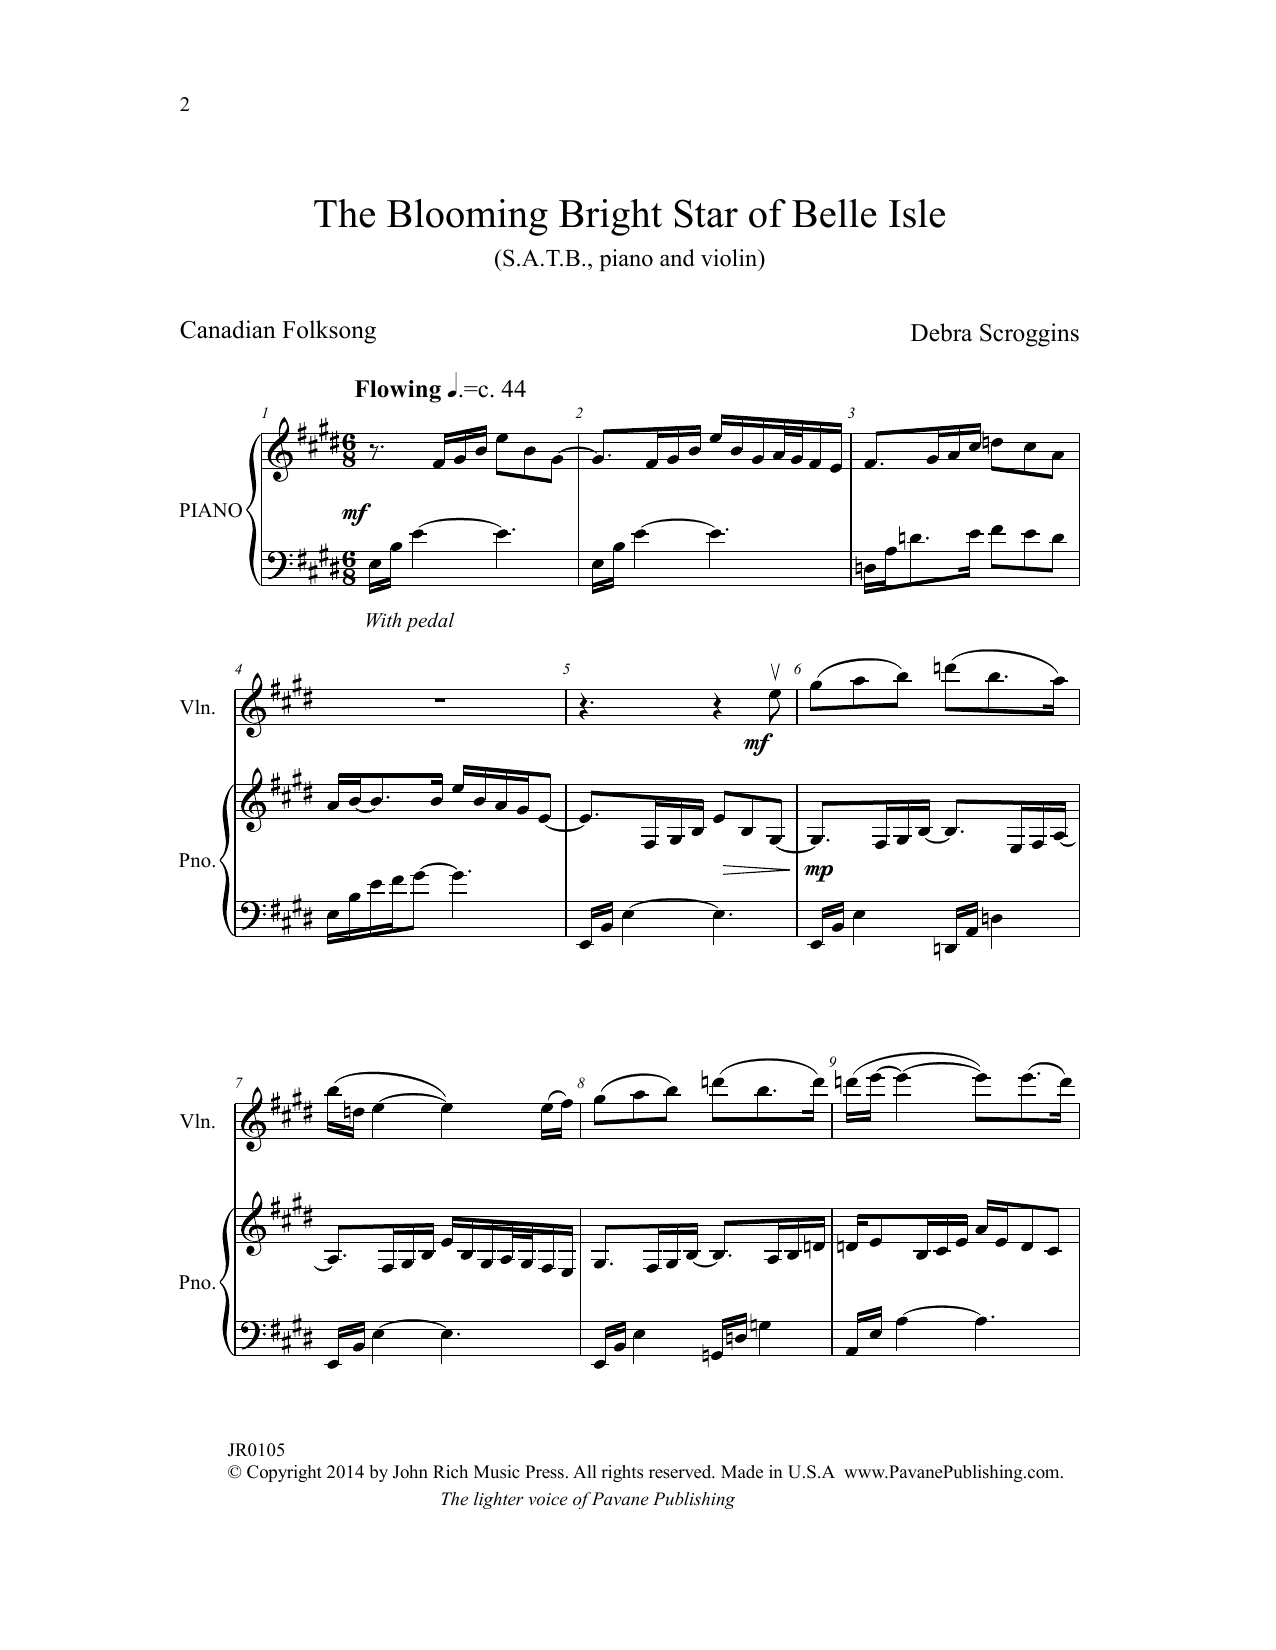 The Blooming Bright Star of Belle Isle sheet music